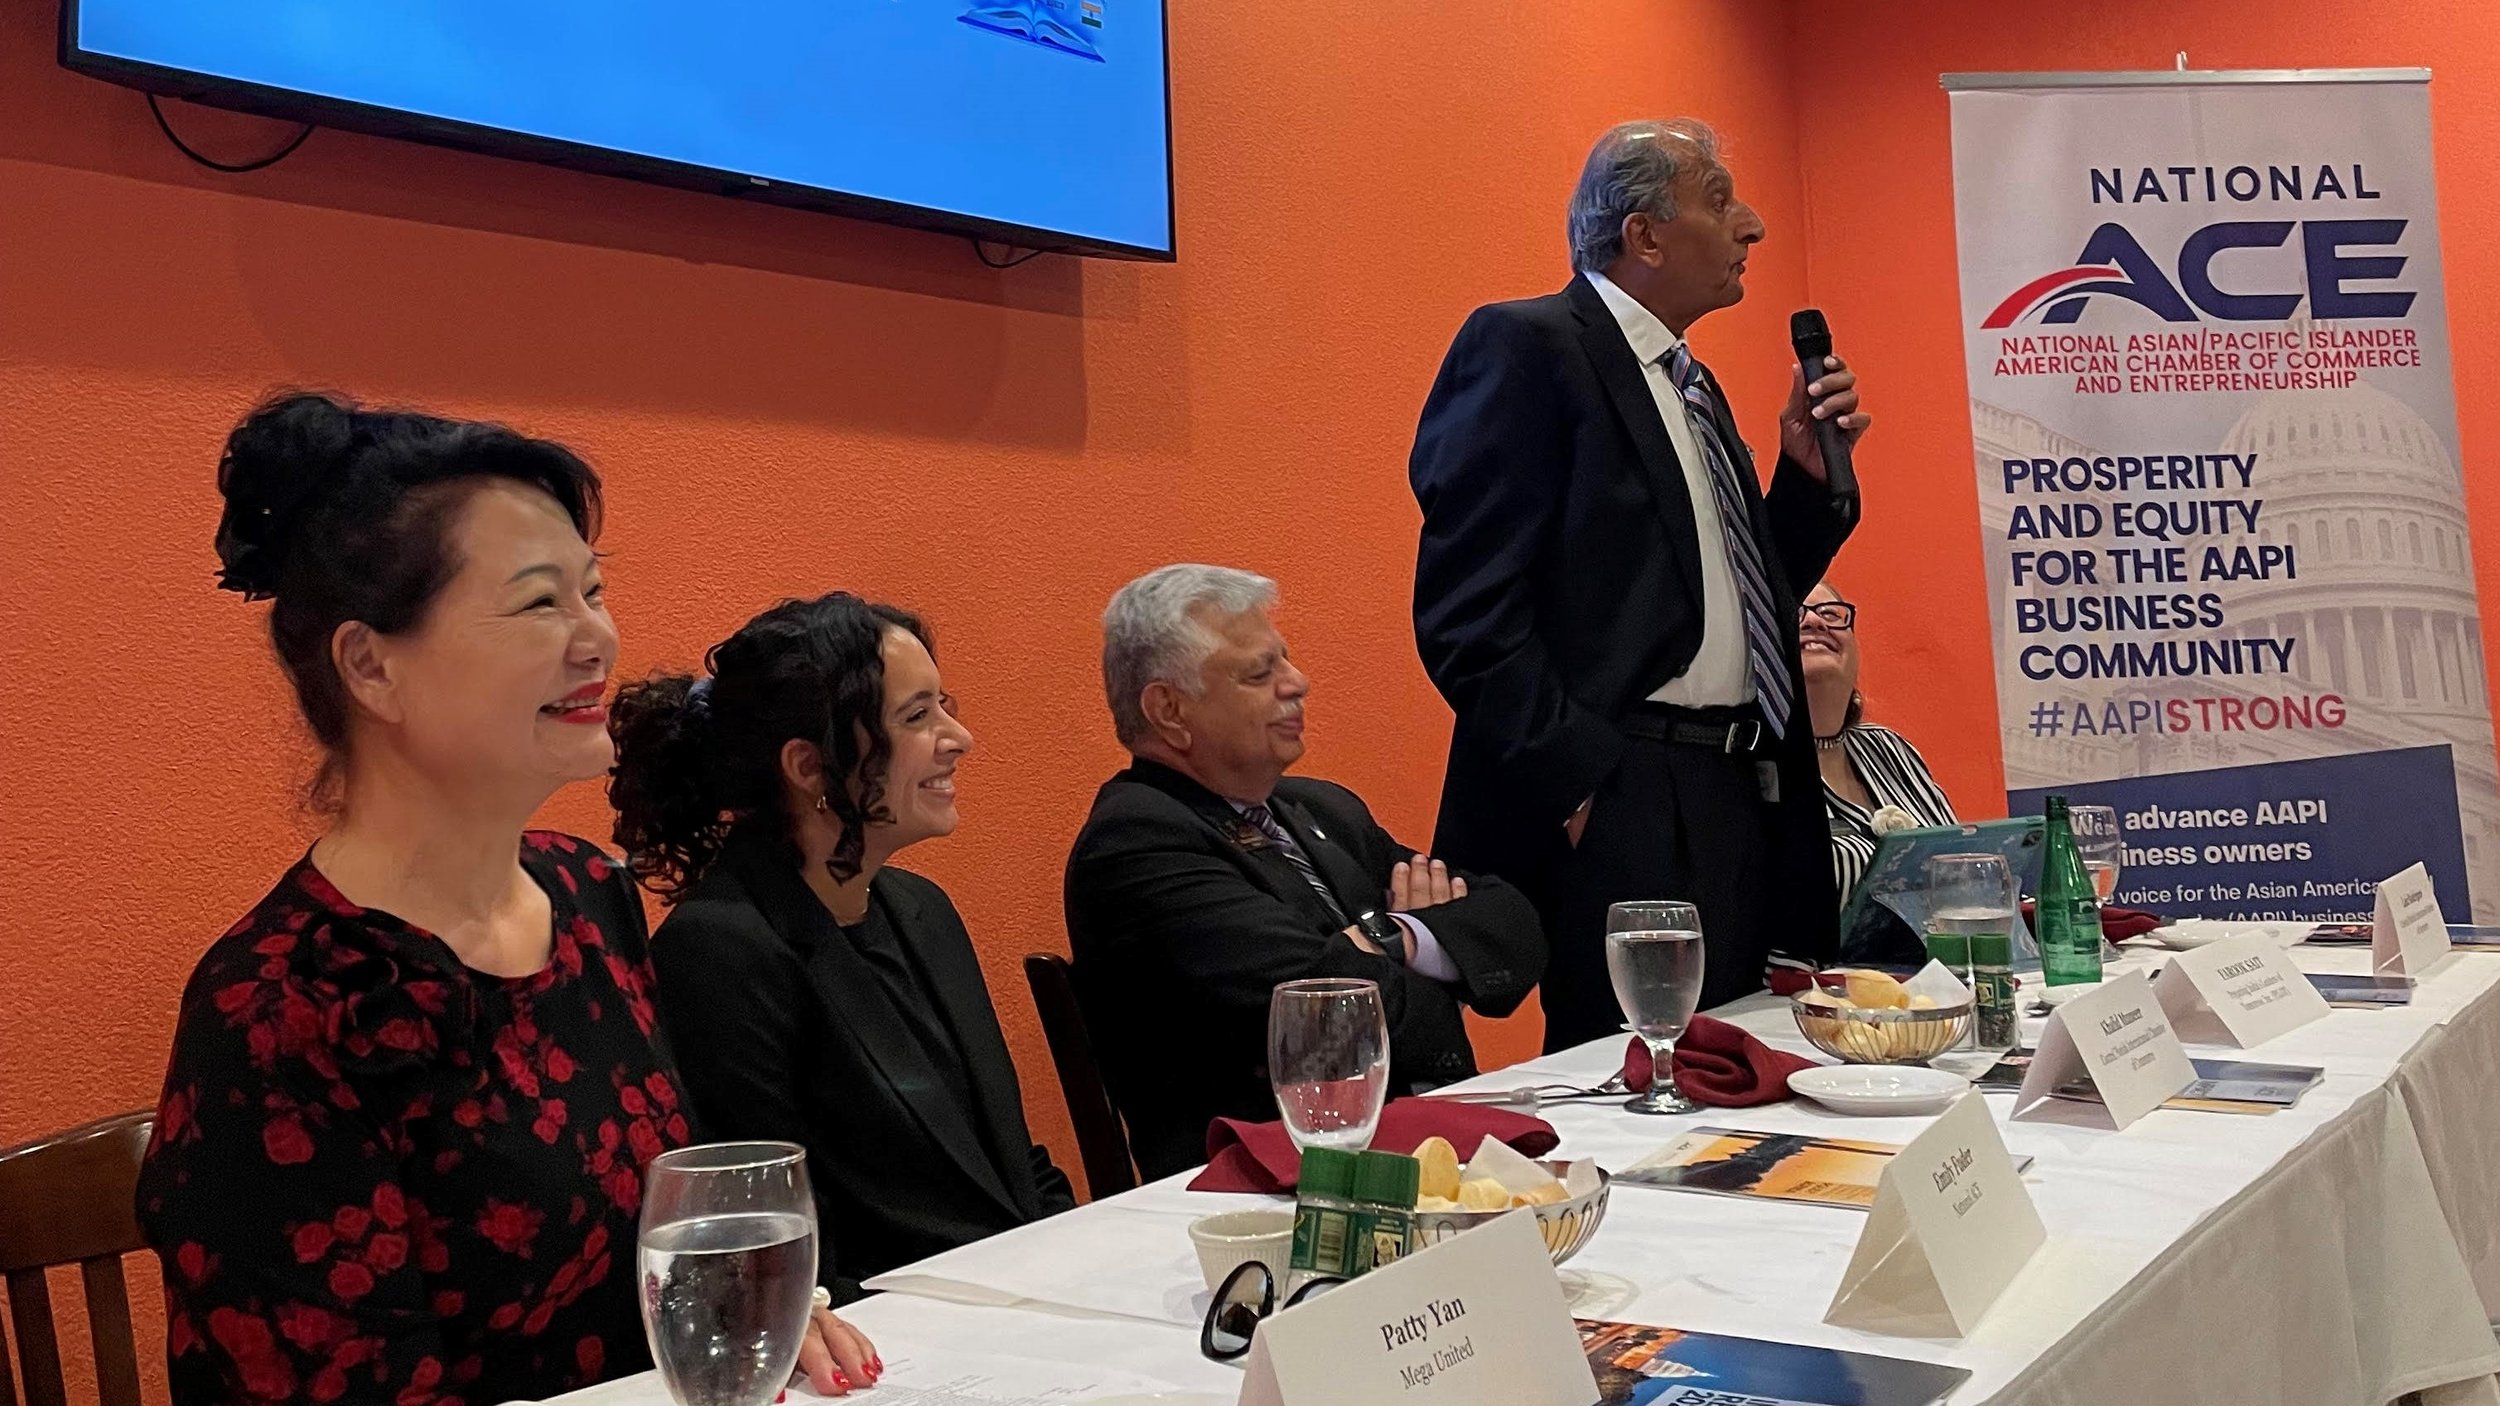 ASIAN AMERICAN SMALL BUSINESS OWNERS MEET WITH GOVERNMENT OFFICIALS IN  ORLANDO TO DISCUSS THE STATE AND FUTURE OF AAPI BUSINESSES — National ACE